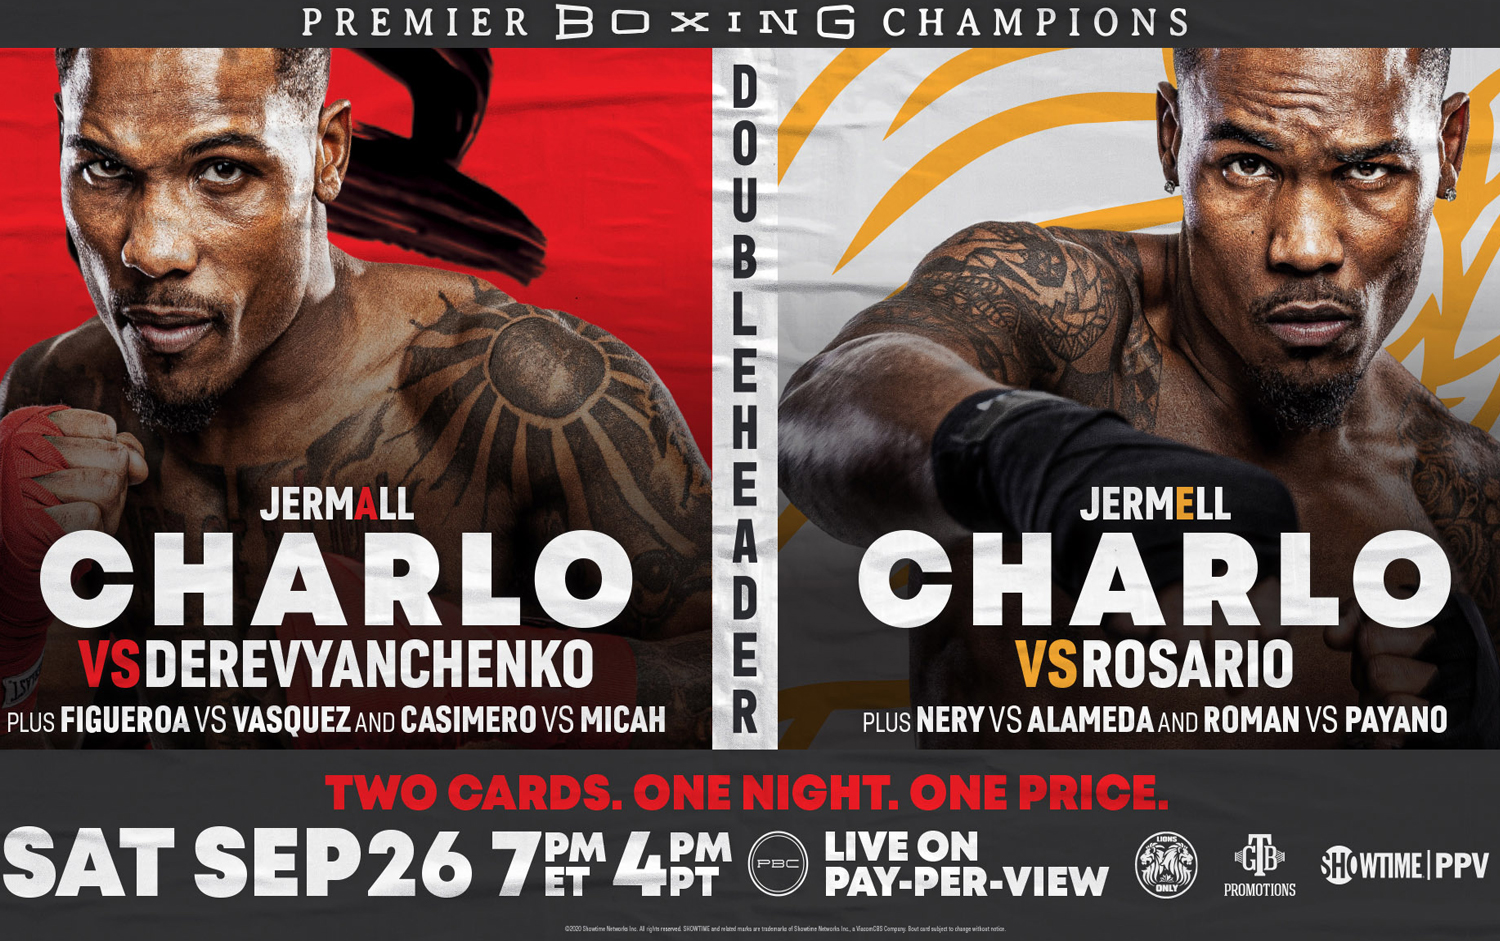 Showtime PPV® Star Constellation presented by PBC and TGB – 2 Cards – 1 night